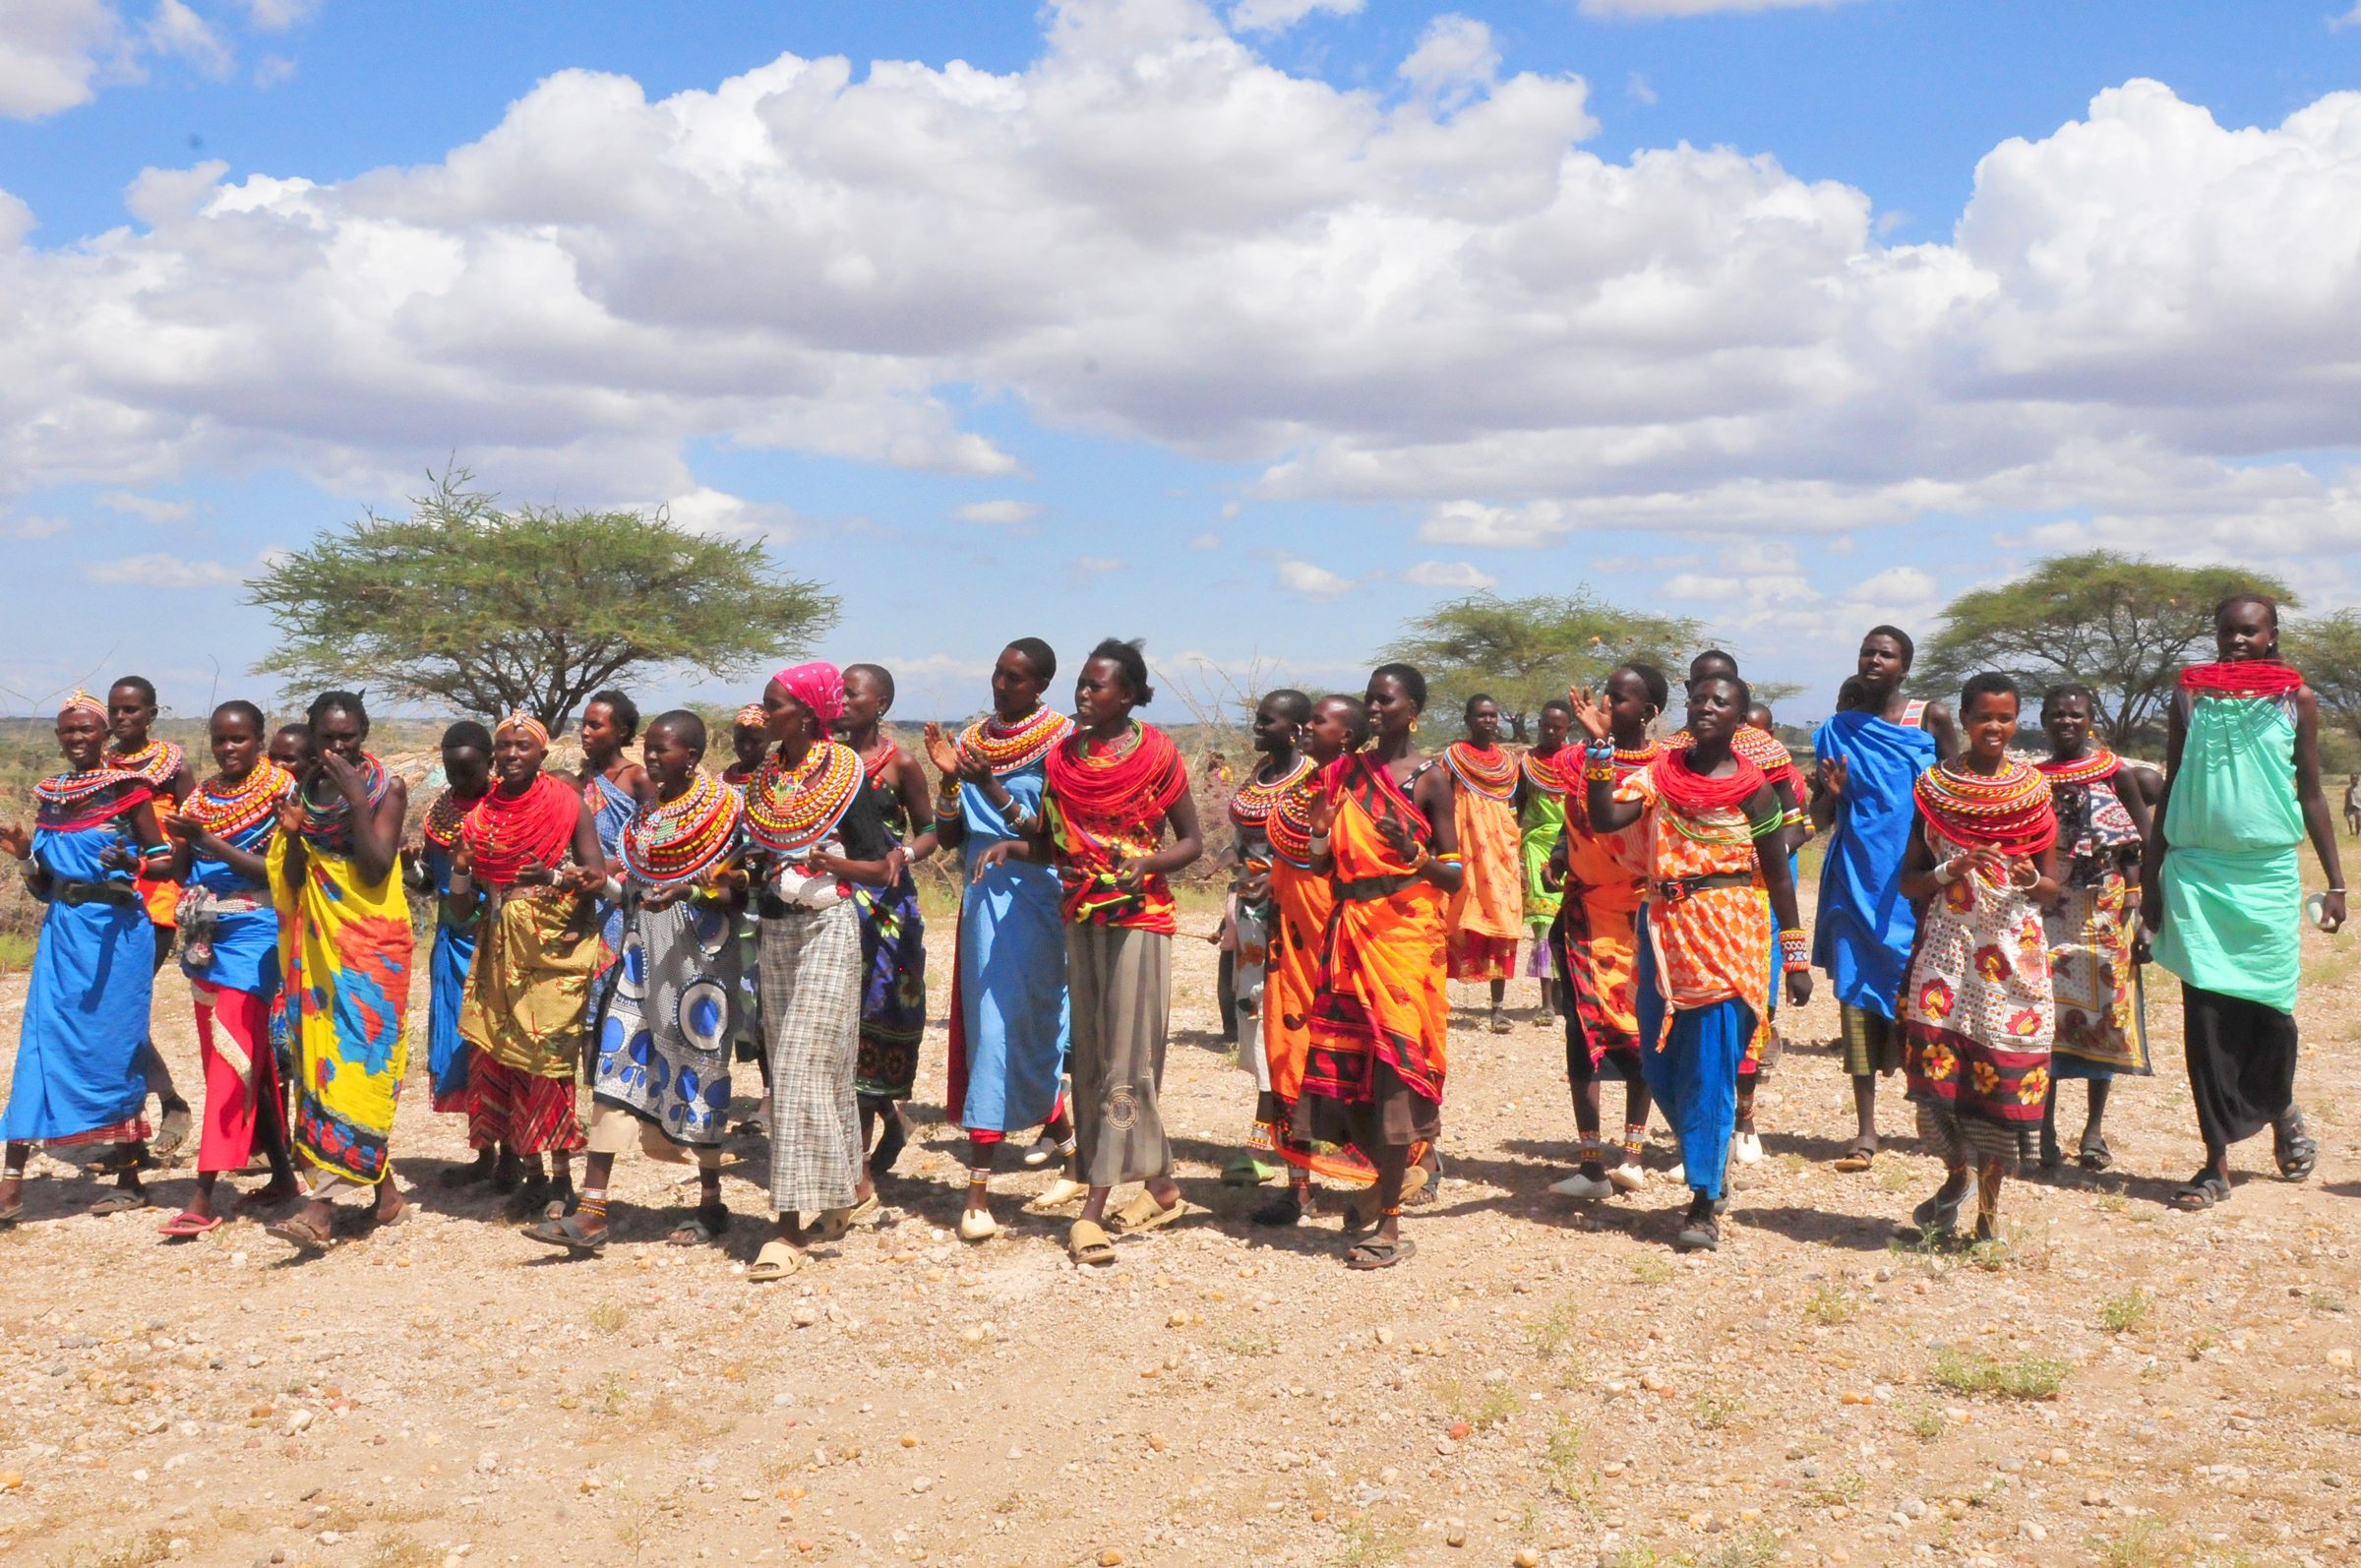 On our safari we'll meet the trail-blazing members of the Enjipai Women's Collaborative, formed by a small group of Maasai women with great entrepreneurial spirit. 